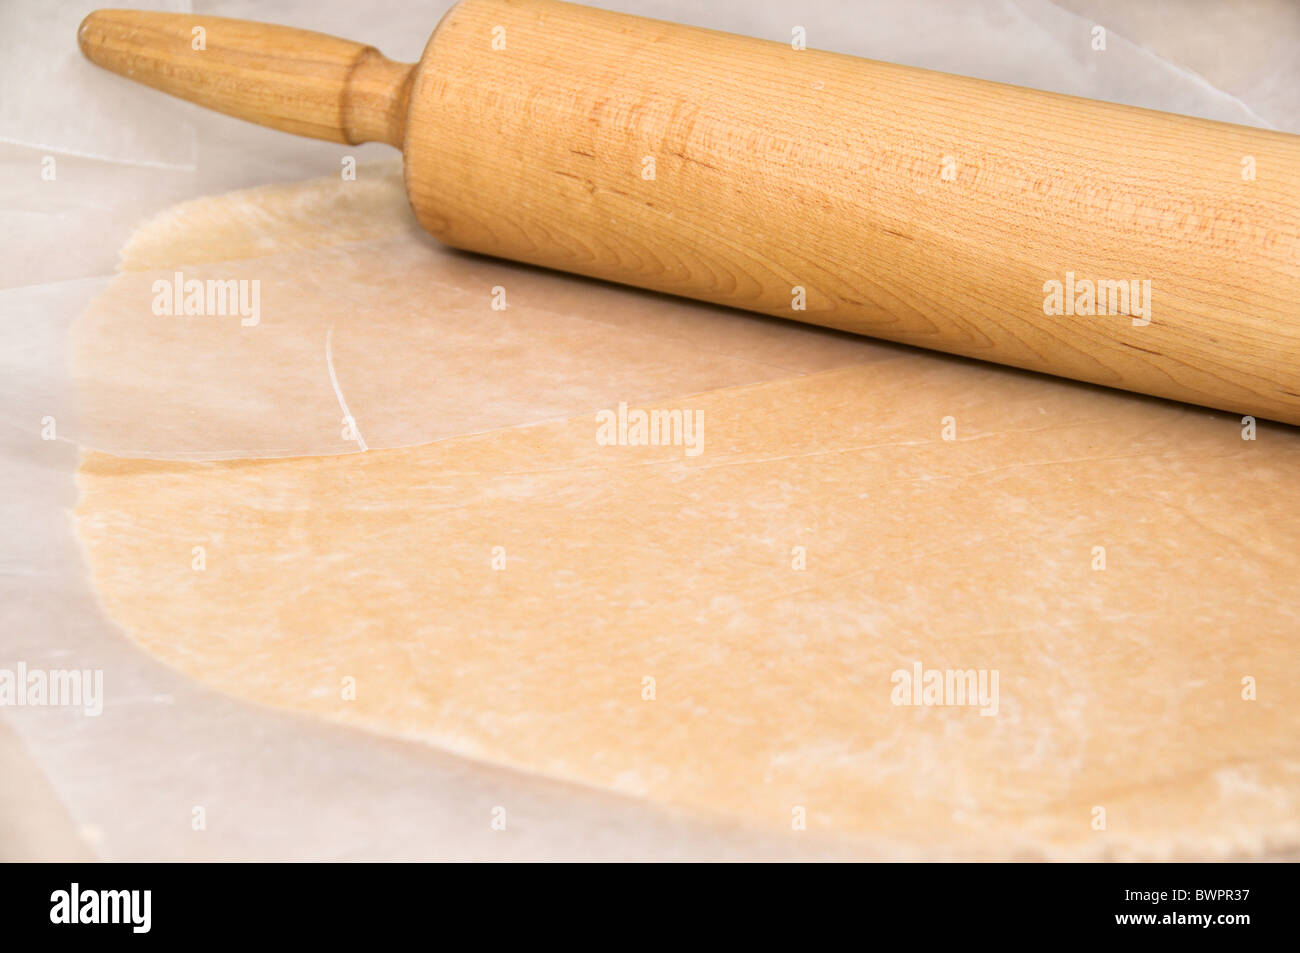 Pie pastry crust is conveniently flattened with a rolling pin between sheets of waxed paper to eliminate a sticky mess. Stock Photo